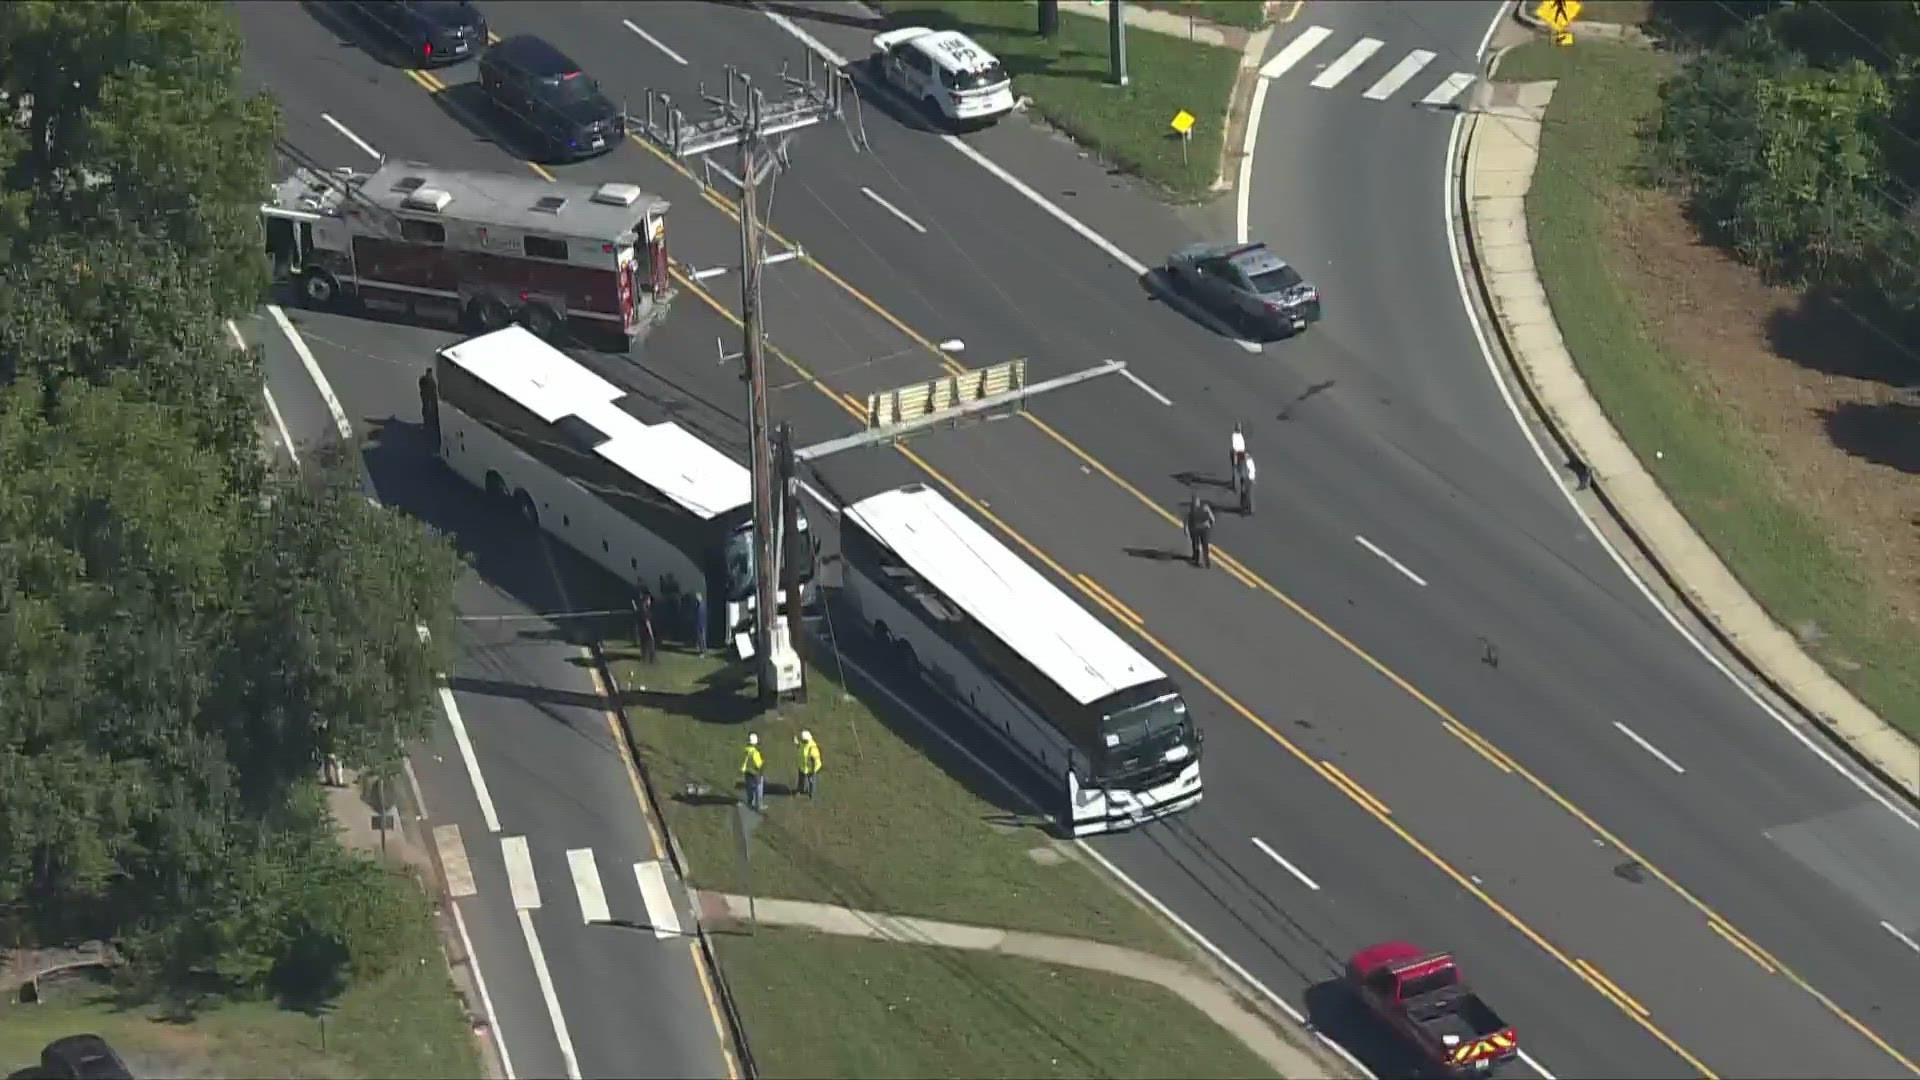 The crash involved a University of Maryland bus and happened in the area of Baltimore Avenue and University Boulevard.